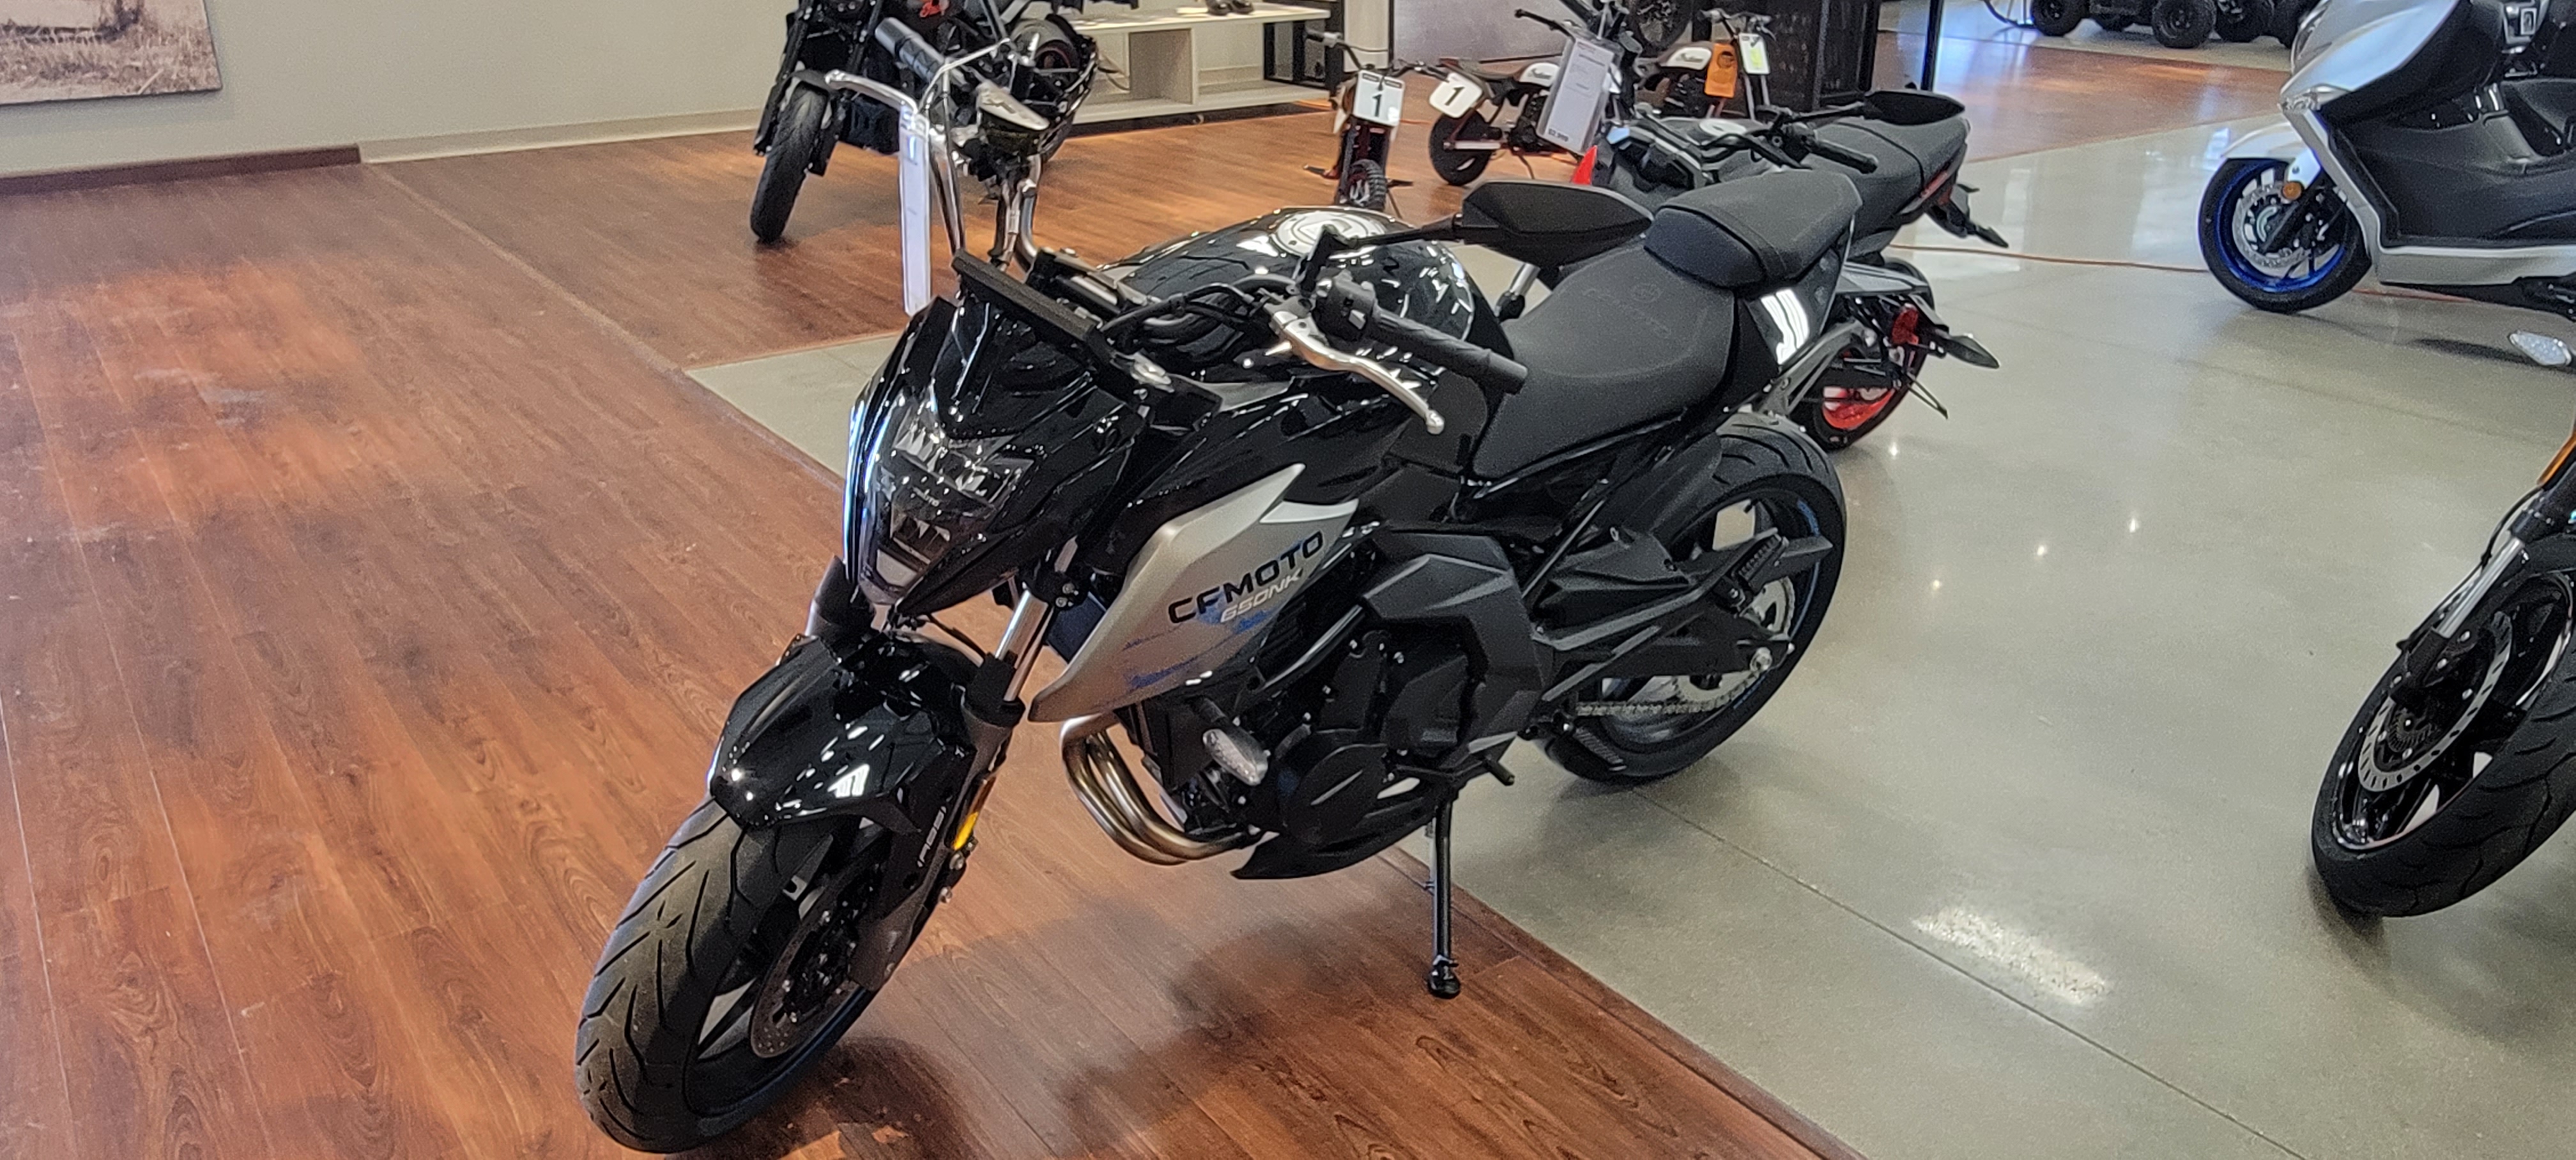 2022 CFMoto 650NK at Brenny's Motorcycle Clinic, Bettendorf, IA 52722